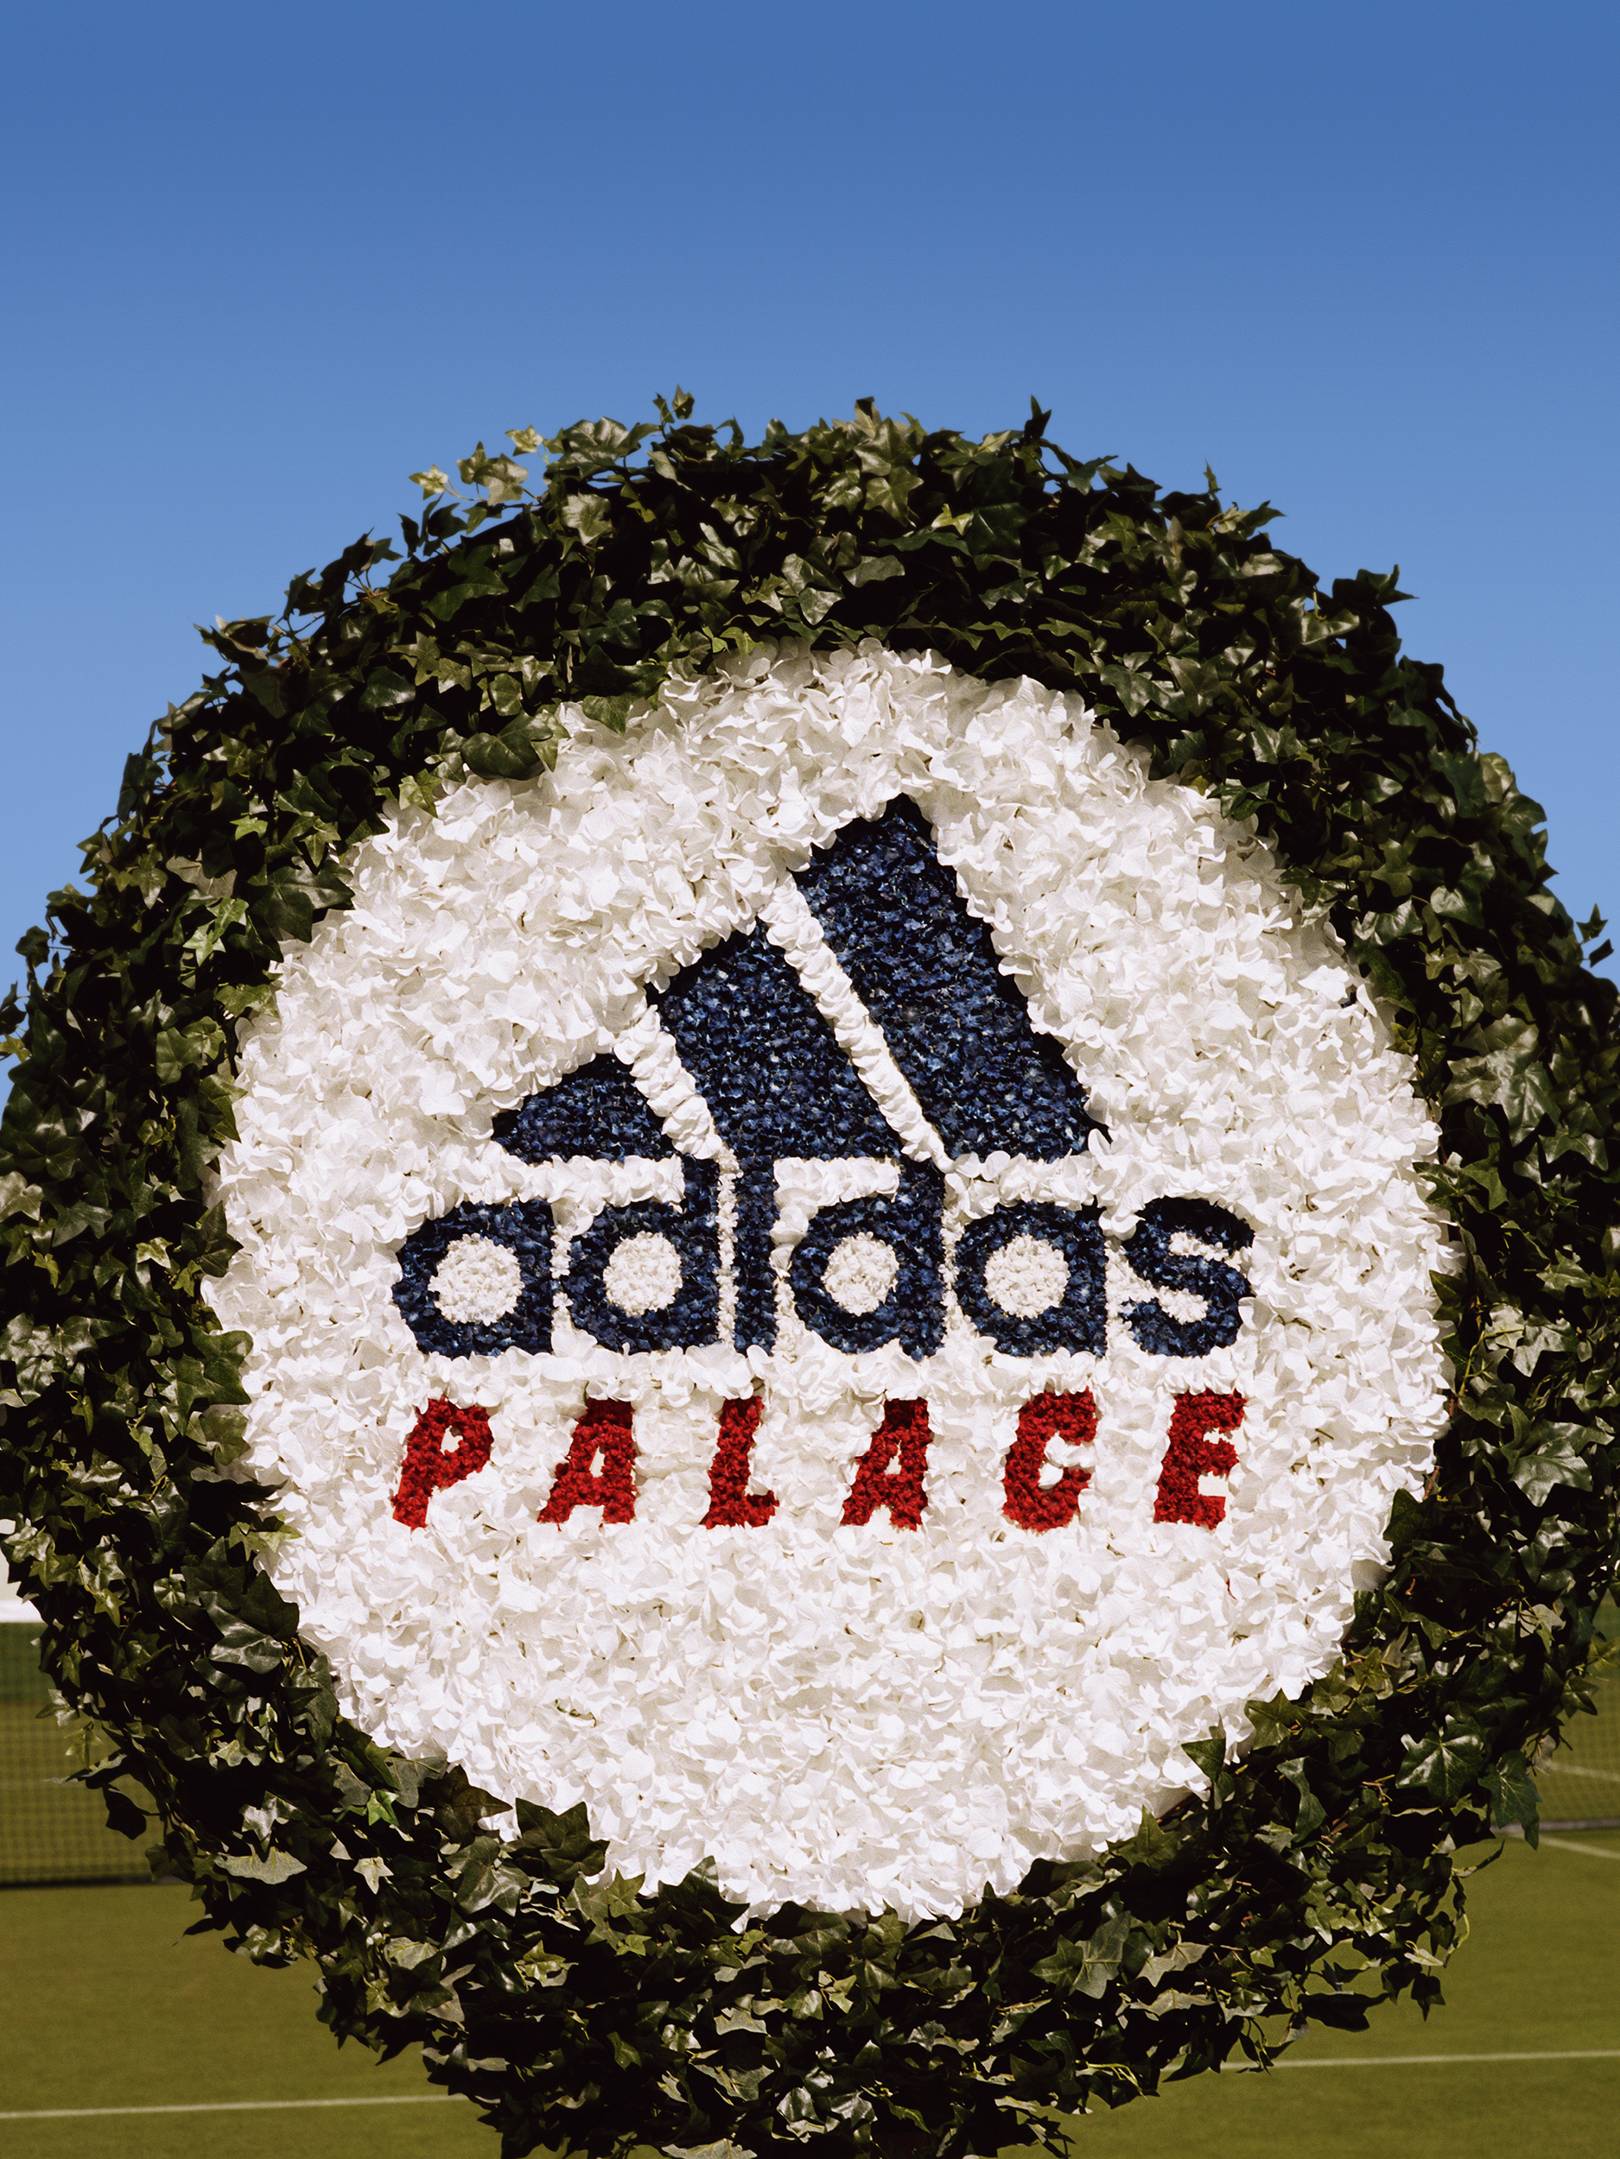 Palace Adidas Logo - Adidas And Palace Team Up For Tennis Collection